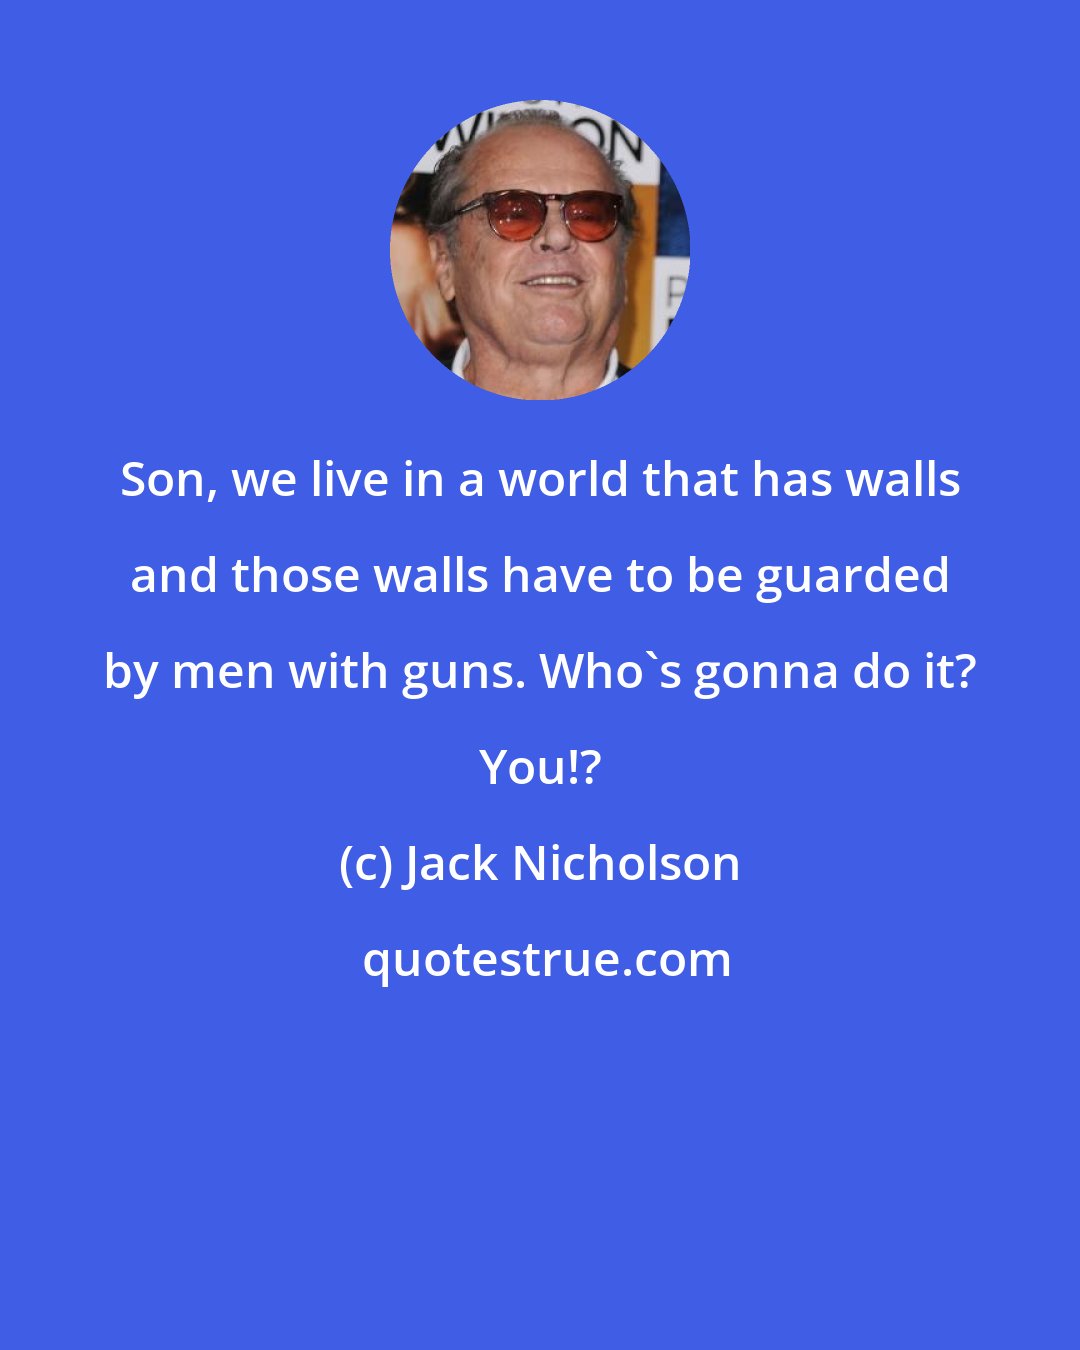 Jack Nicholson: Son, we live in a world that has walls and those walls have to be guarded by men with guns. Who's gonna do it? You!?